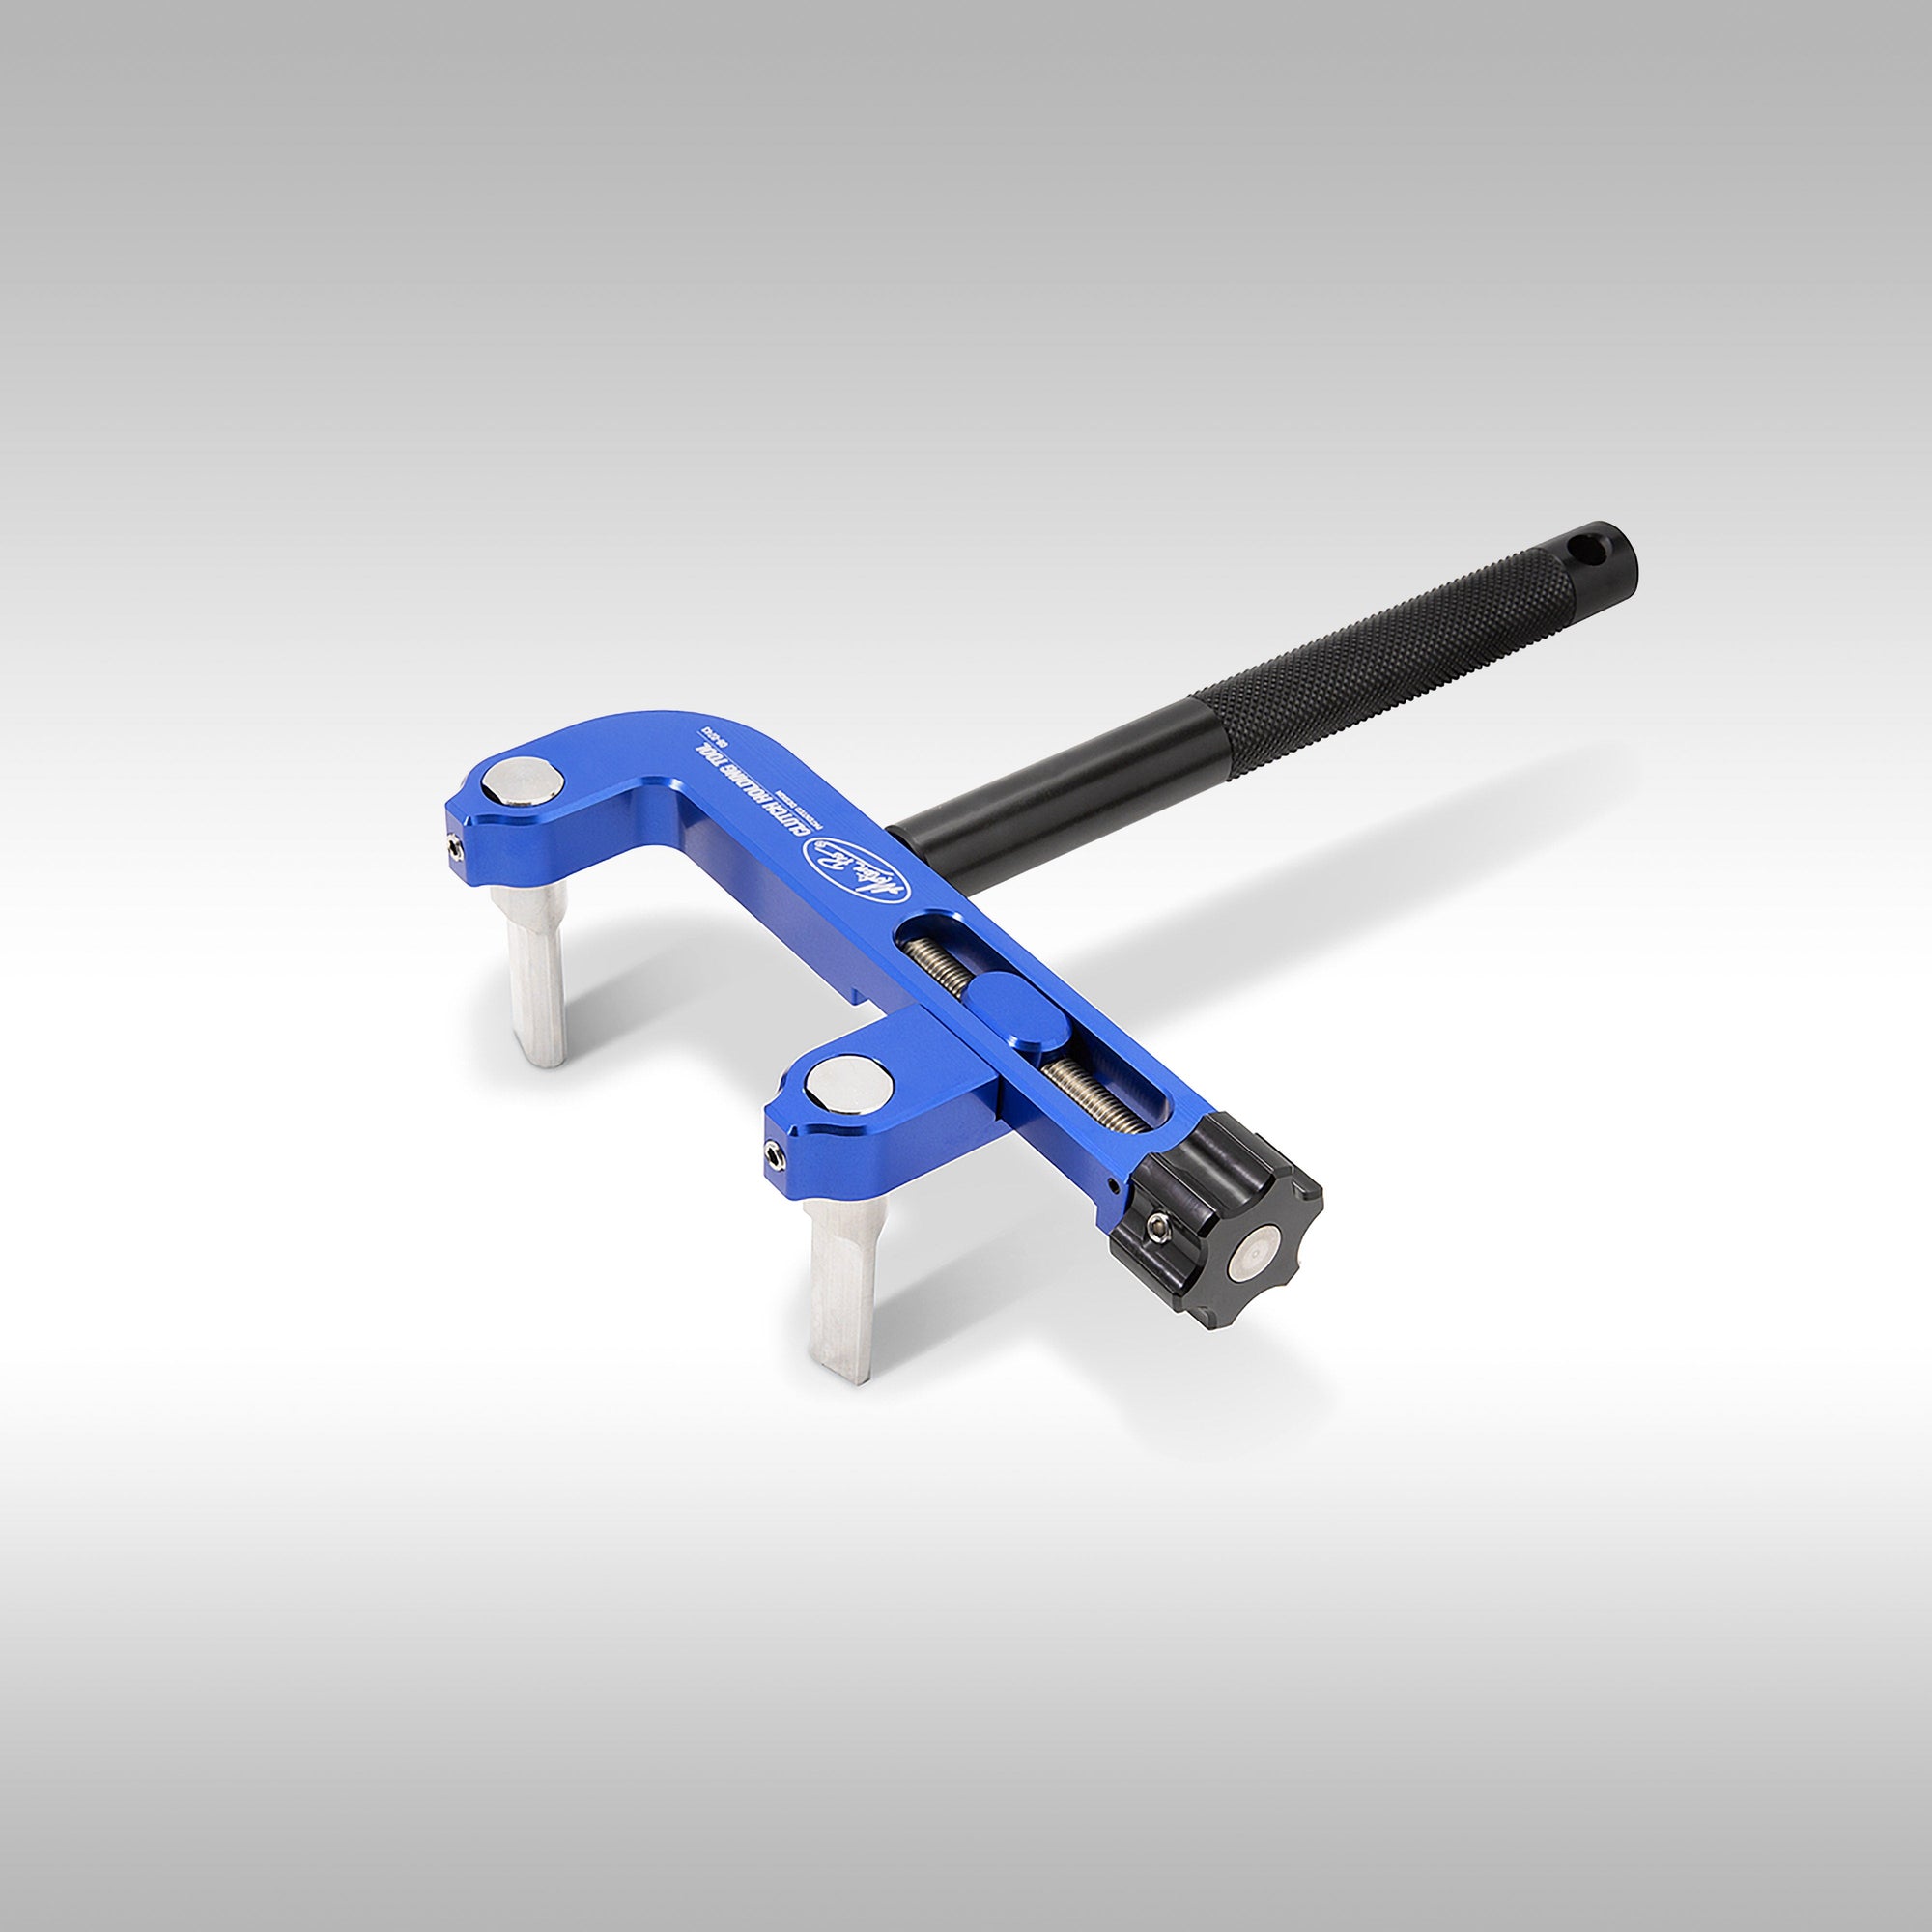 Motion Pro heavy duty clutch holder tool makes maintaining the clutch on your motorcycle or ATV much easier. 